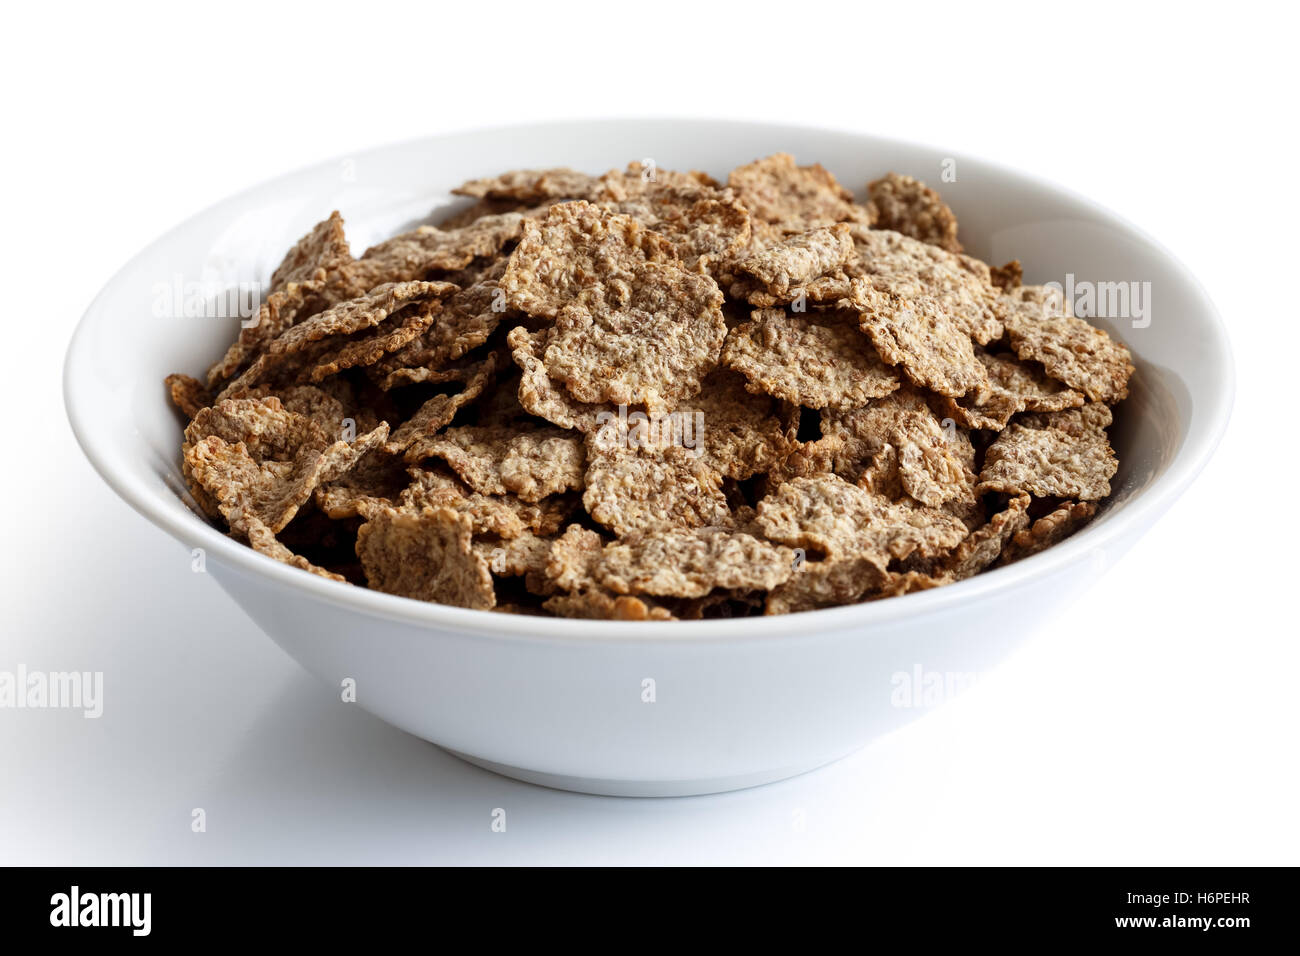 Wheat bran breakfast cereal with no milk in a bowl isolated on white background. Stock Photo